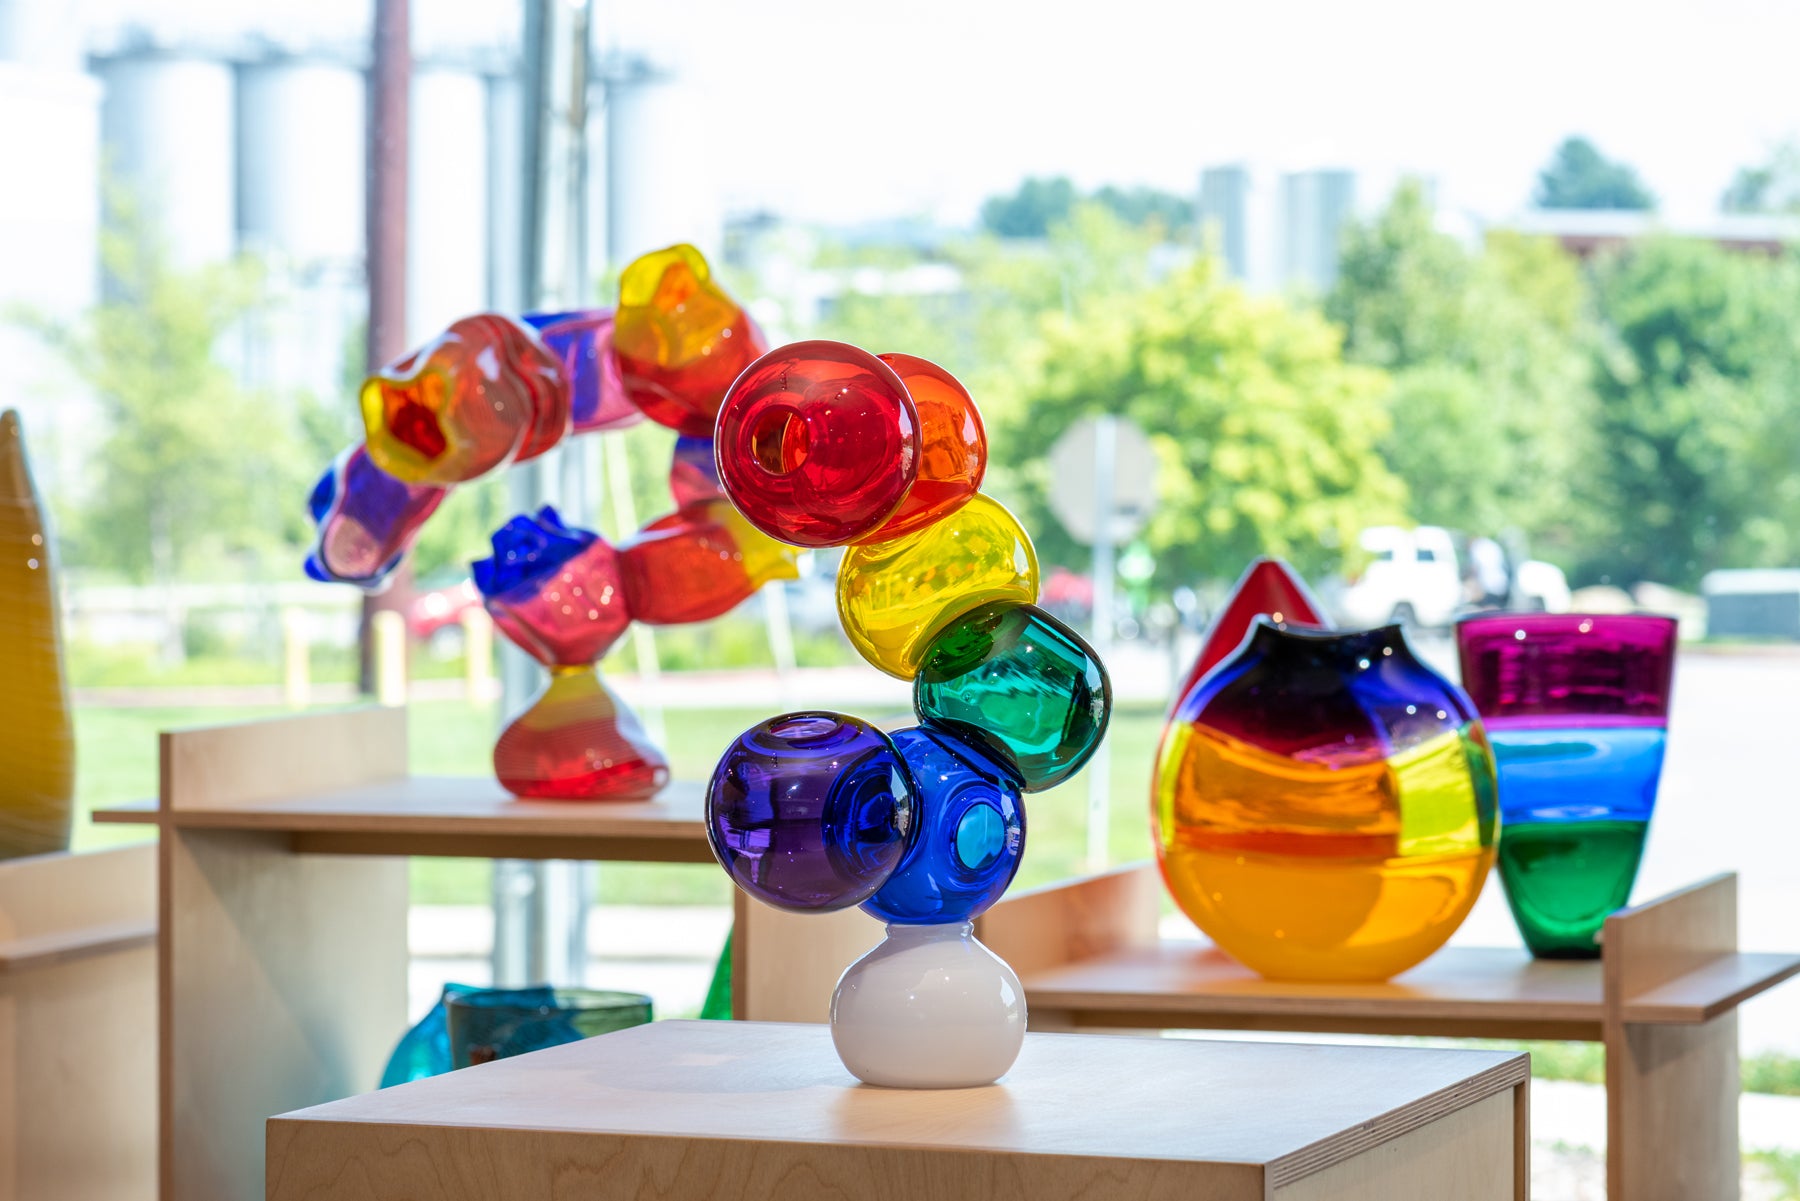 A view of a rainbow colored bubble sculpture in the small batch glass gallery with more brightly colored glass vases in the background. Image by Loam